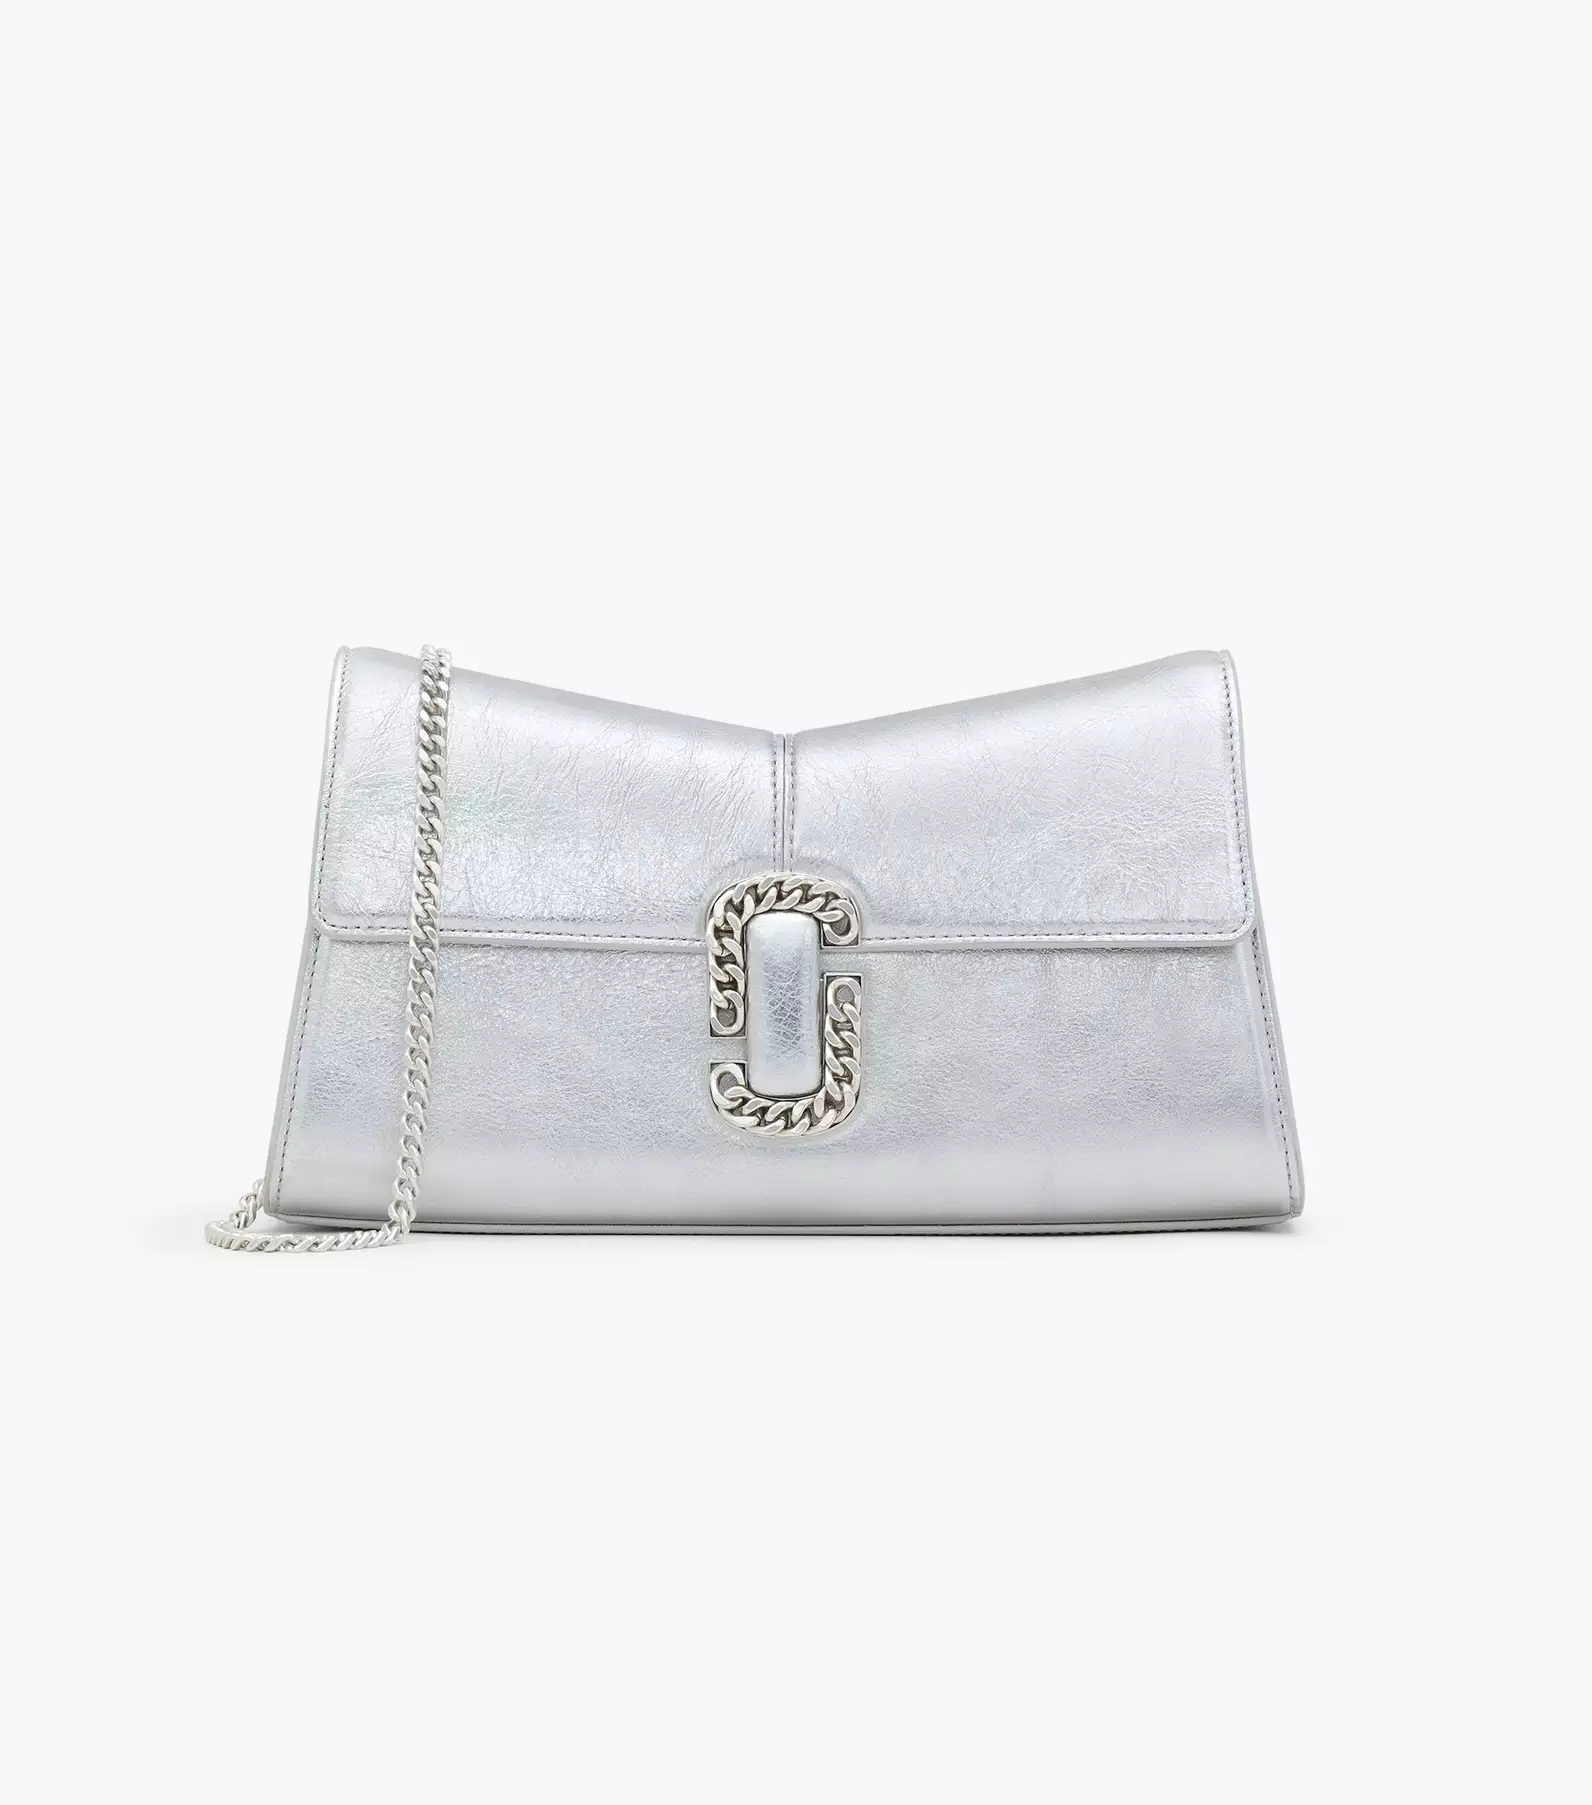 marc by marc jacobs clutch